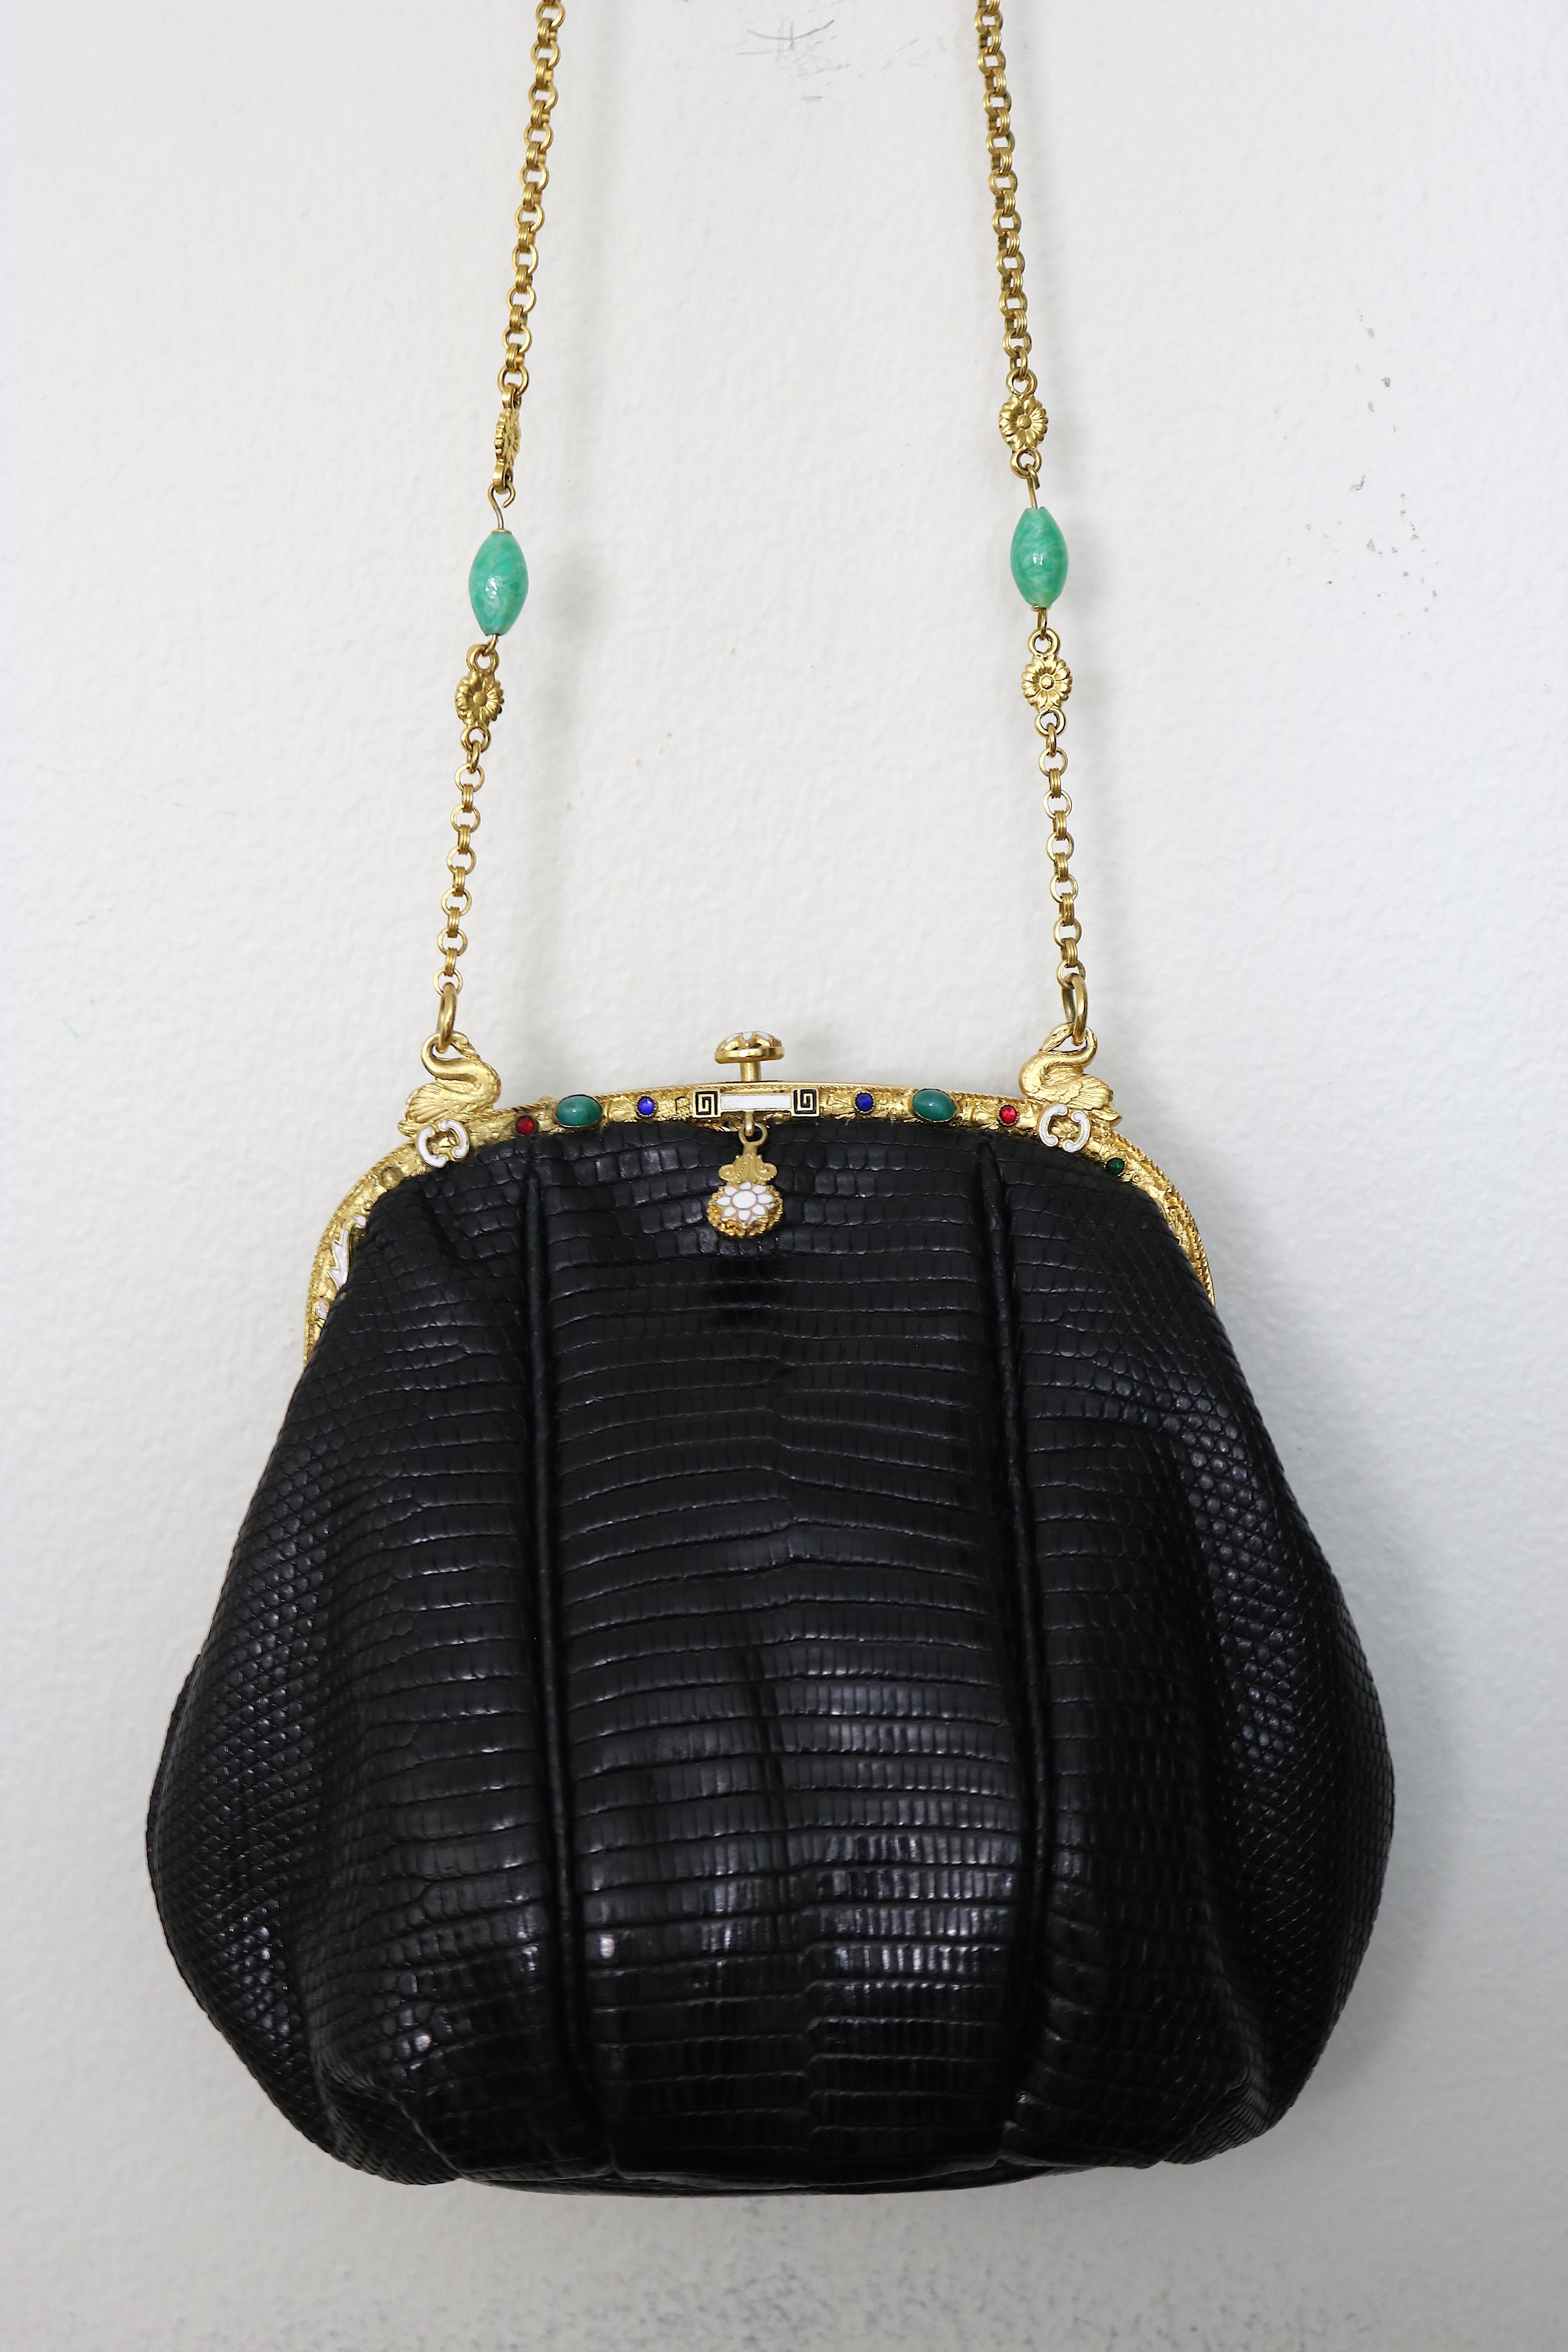 Gorgeous and Rare black lizard Jeweled Evening Bag designed with a circa 1925 24 Karat Gold plate Art Nouveau Frame with a pair of beautiful 24 K gold-plate Swan rings holding the chain on top of the bag. Truly a work of art!

The frame has enamel